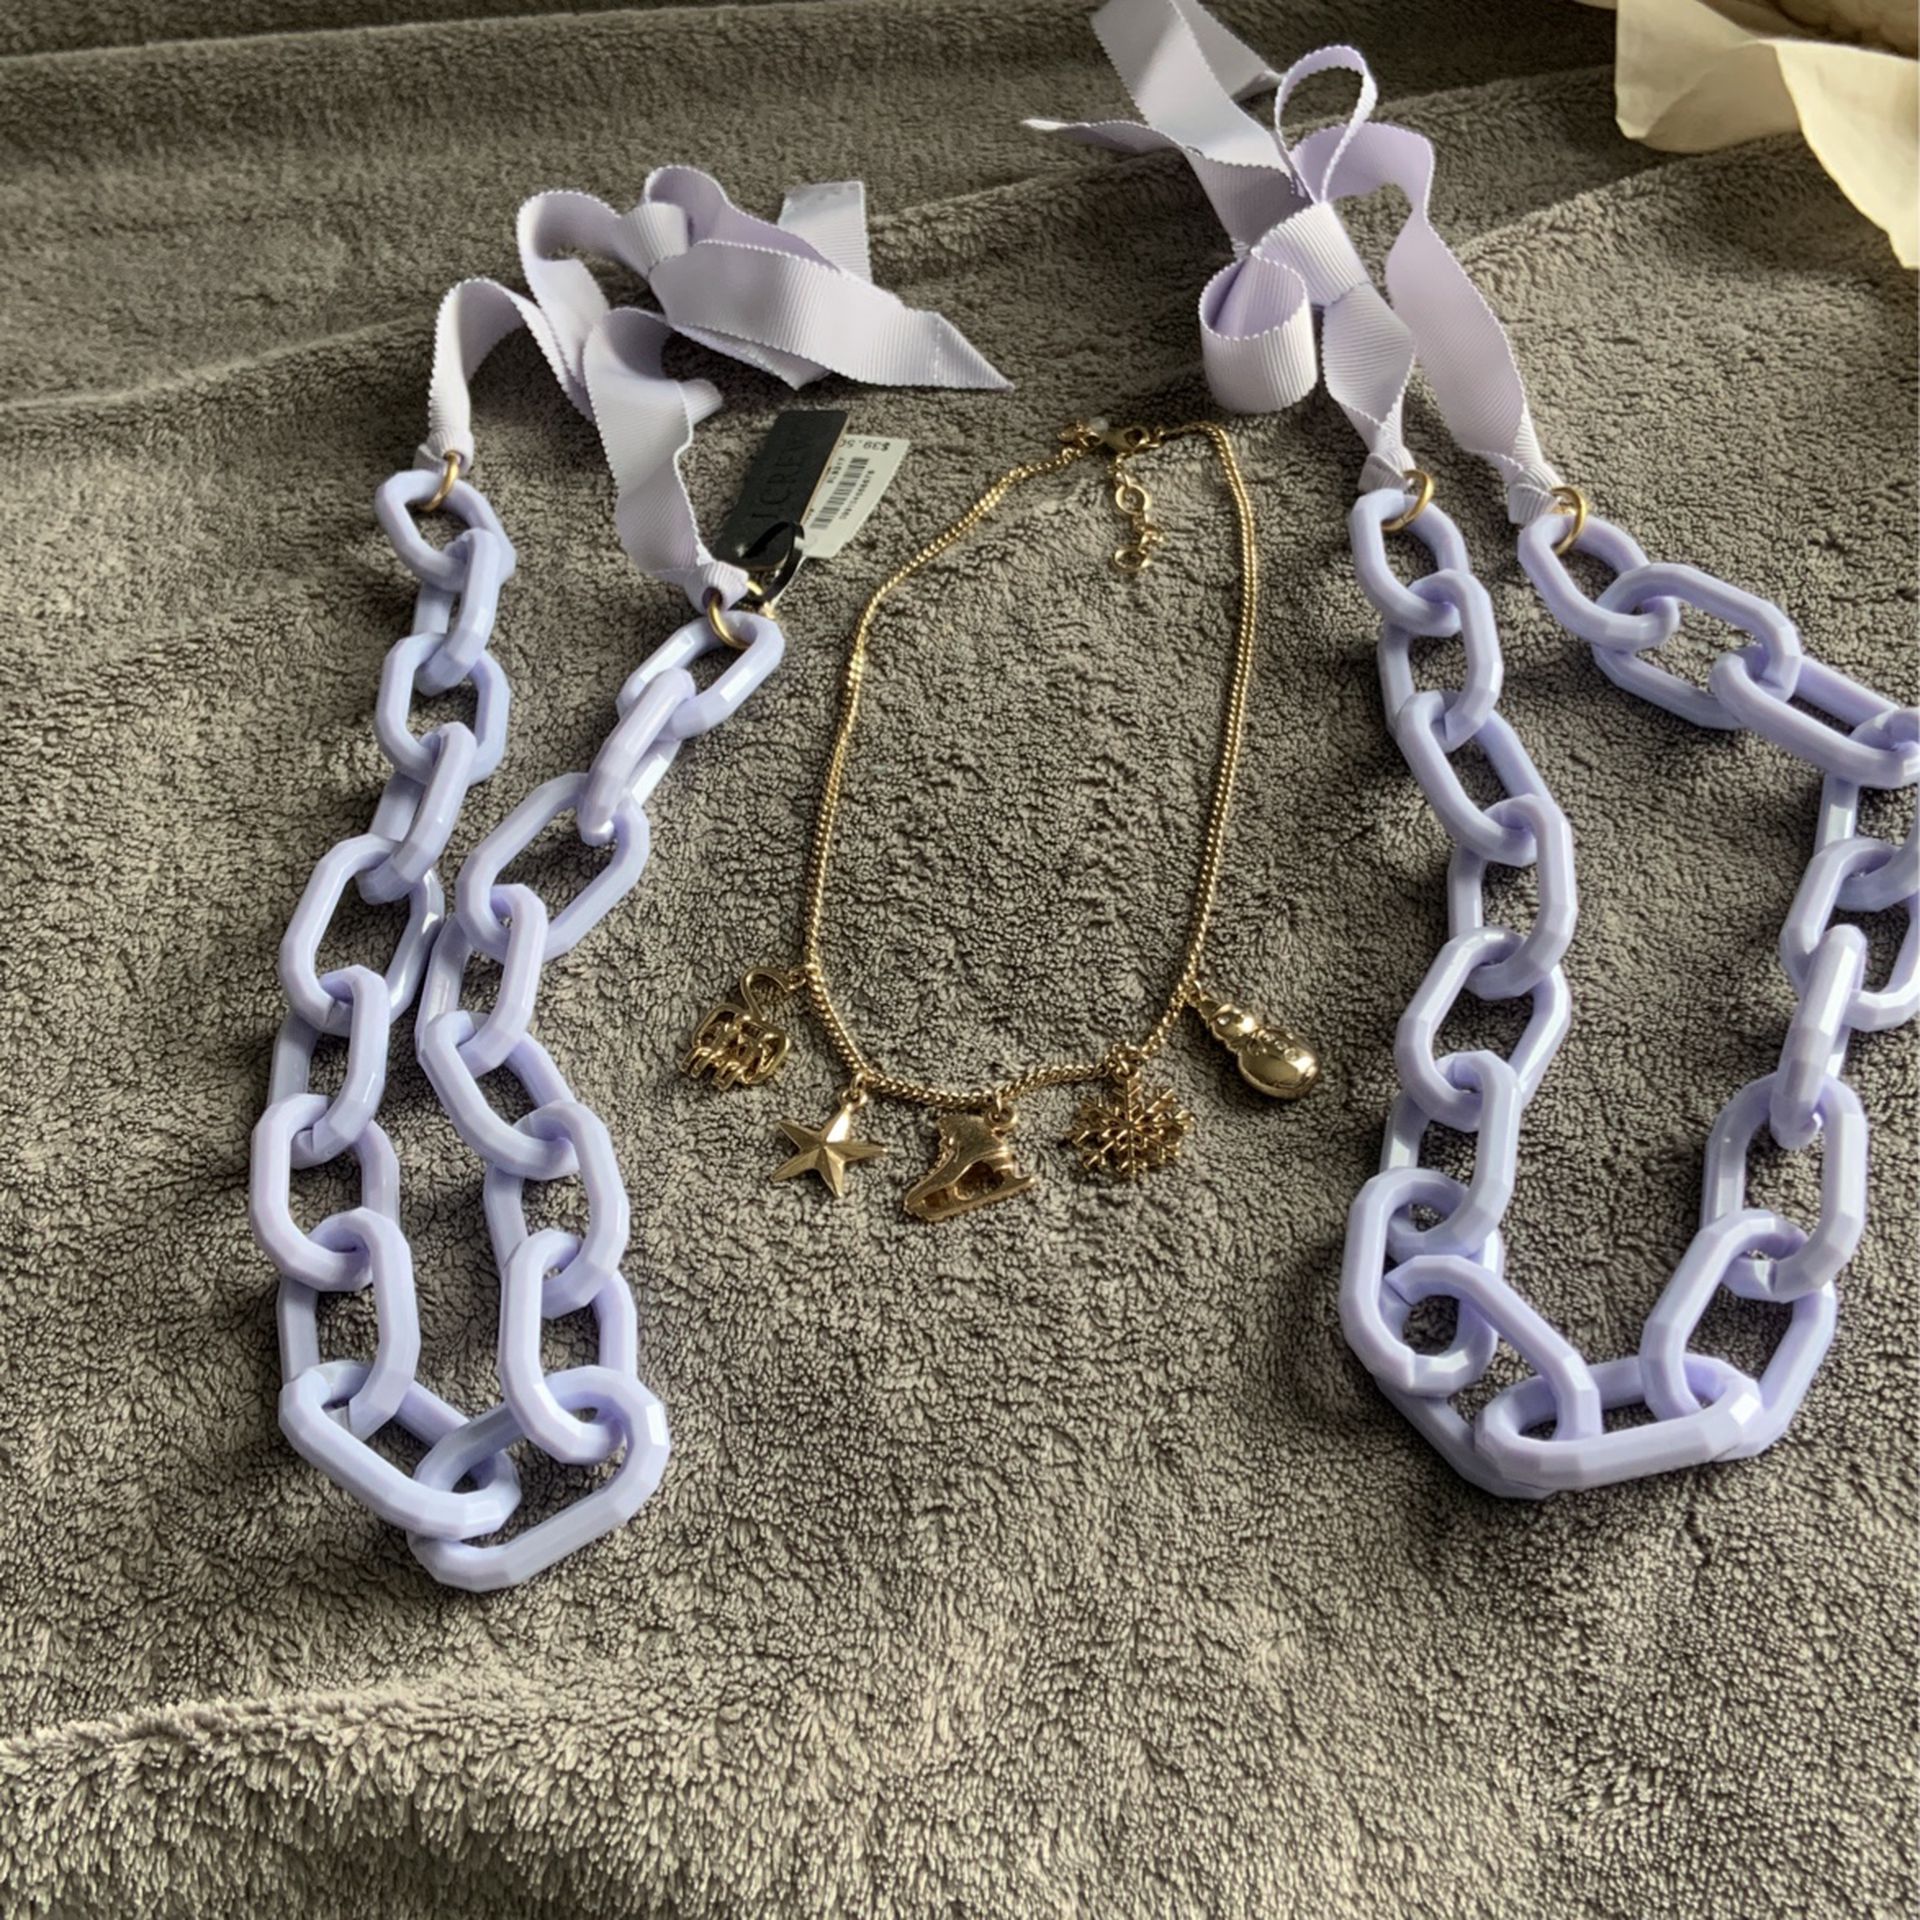 Jewelry. New J Crew New Necklaces. Lavender And Grosgrain Ribbon With Links And A Winter Ski  Charm Necklace$15 Each 